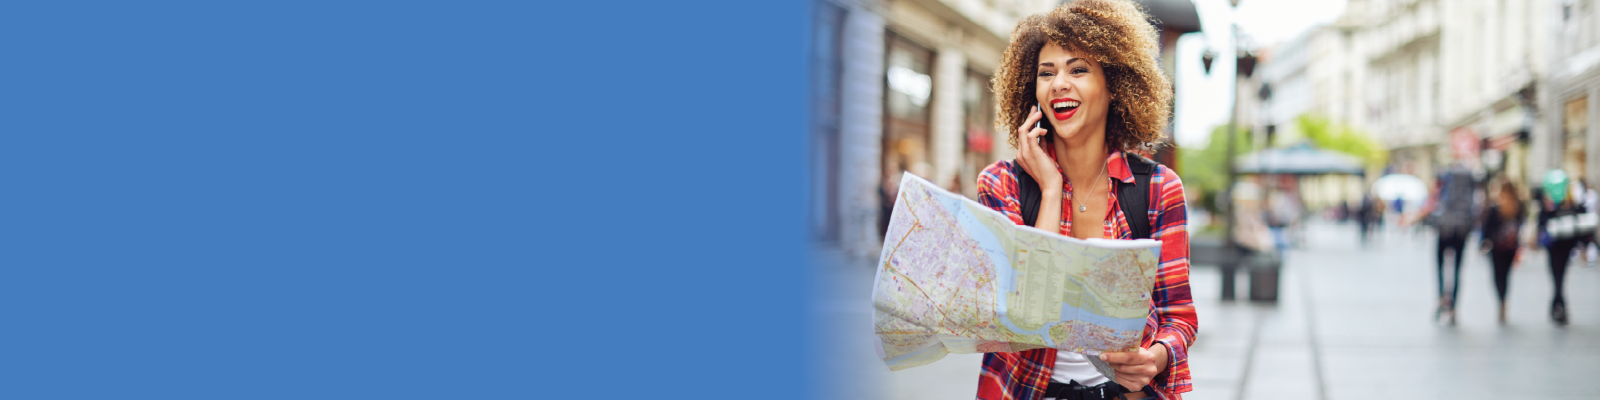 Header image showing young female traveler holding map, on the phone